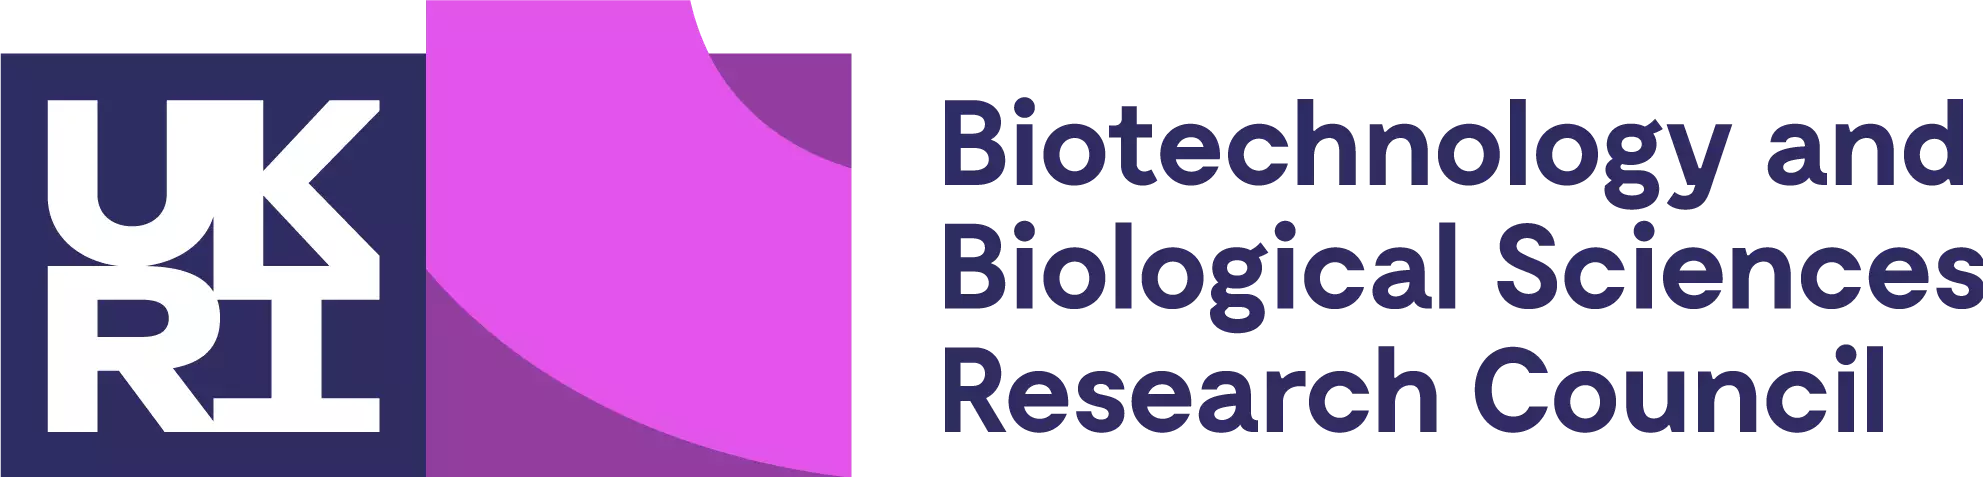 Biotechnology and Biological Sciences Research Council (BBSRC)